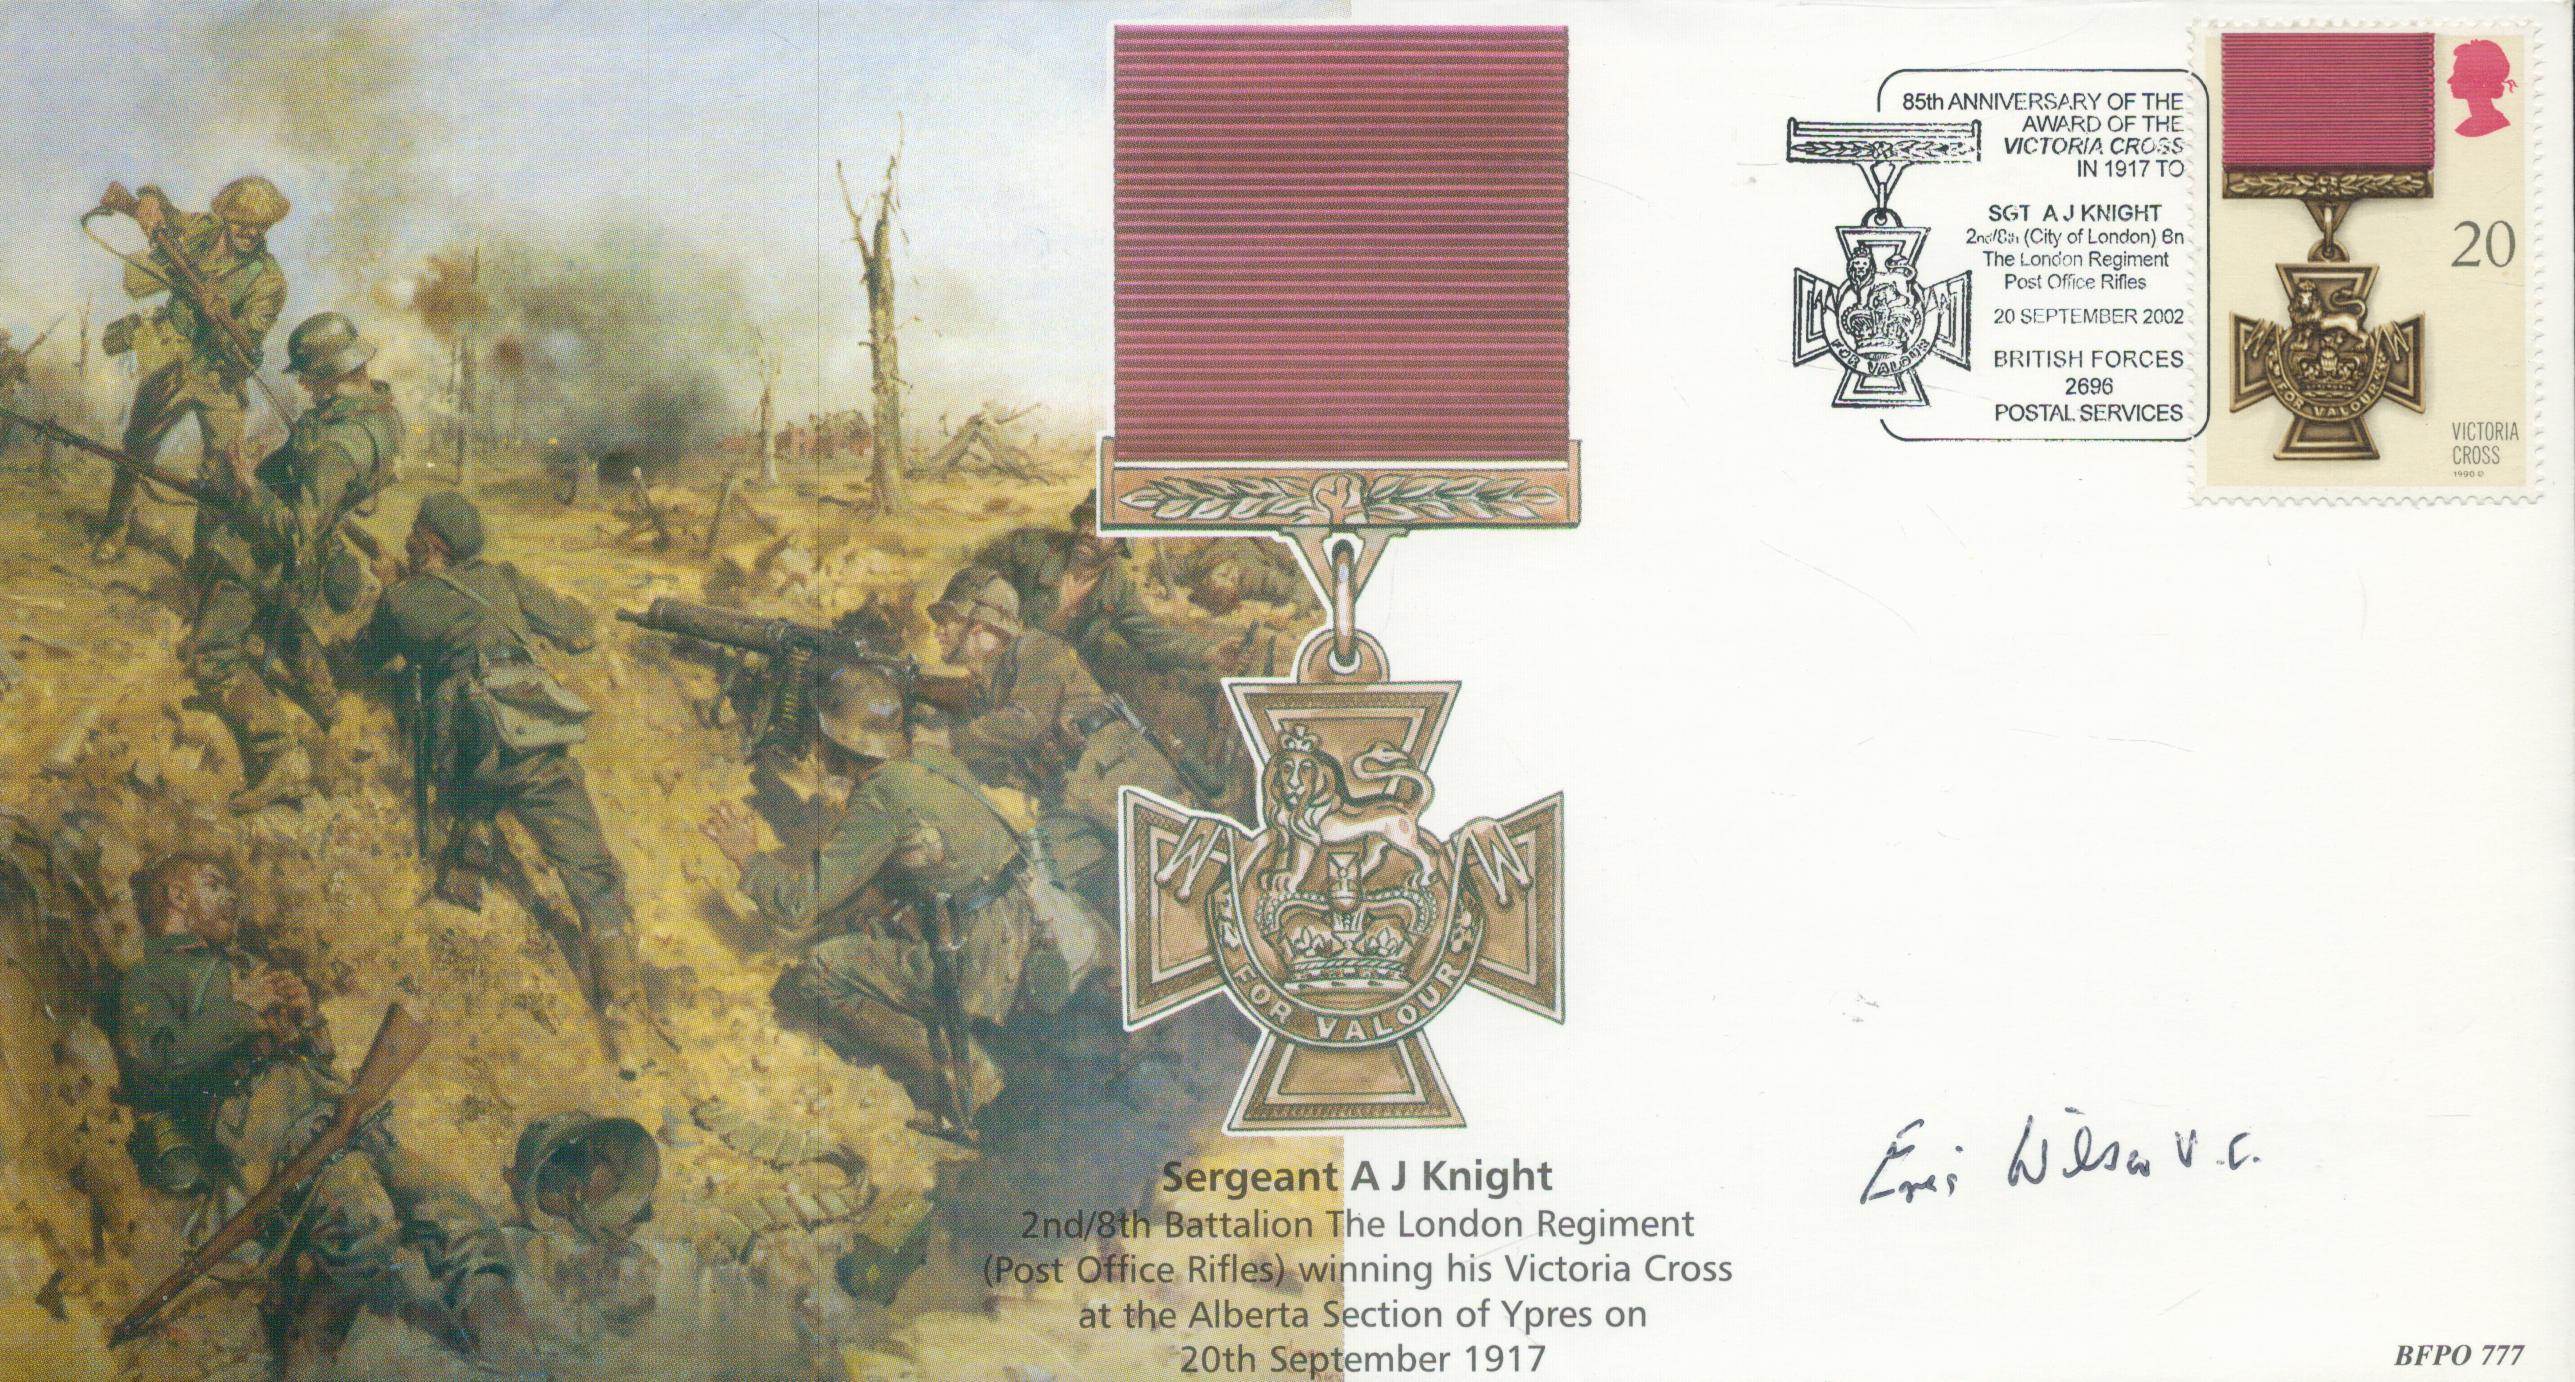 WW2 Eric Wilson VC Victoria Cross winner signed 2002 Sgt Knight VC cover. On 11-15 August 1940